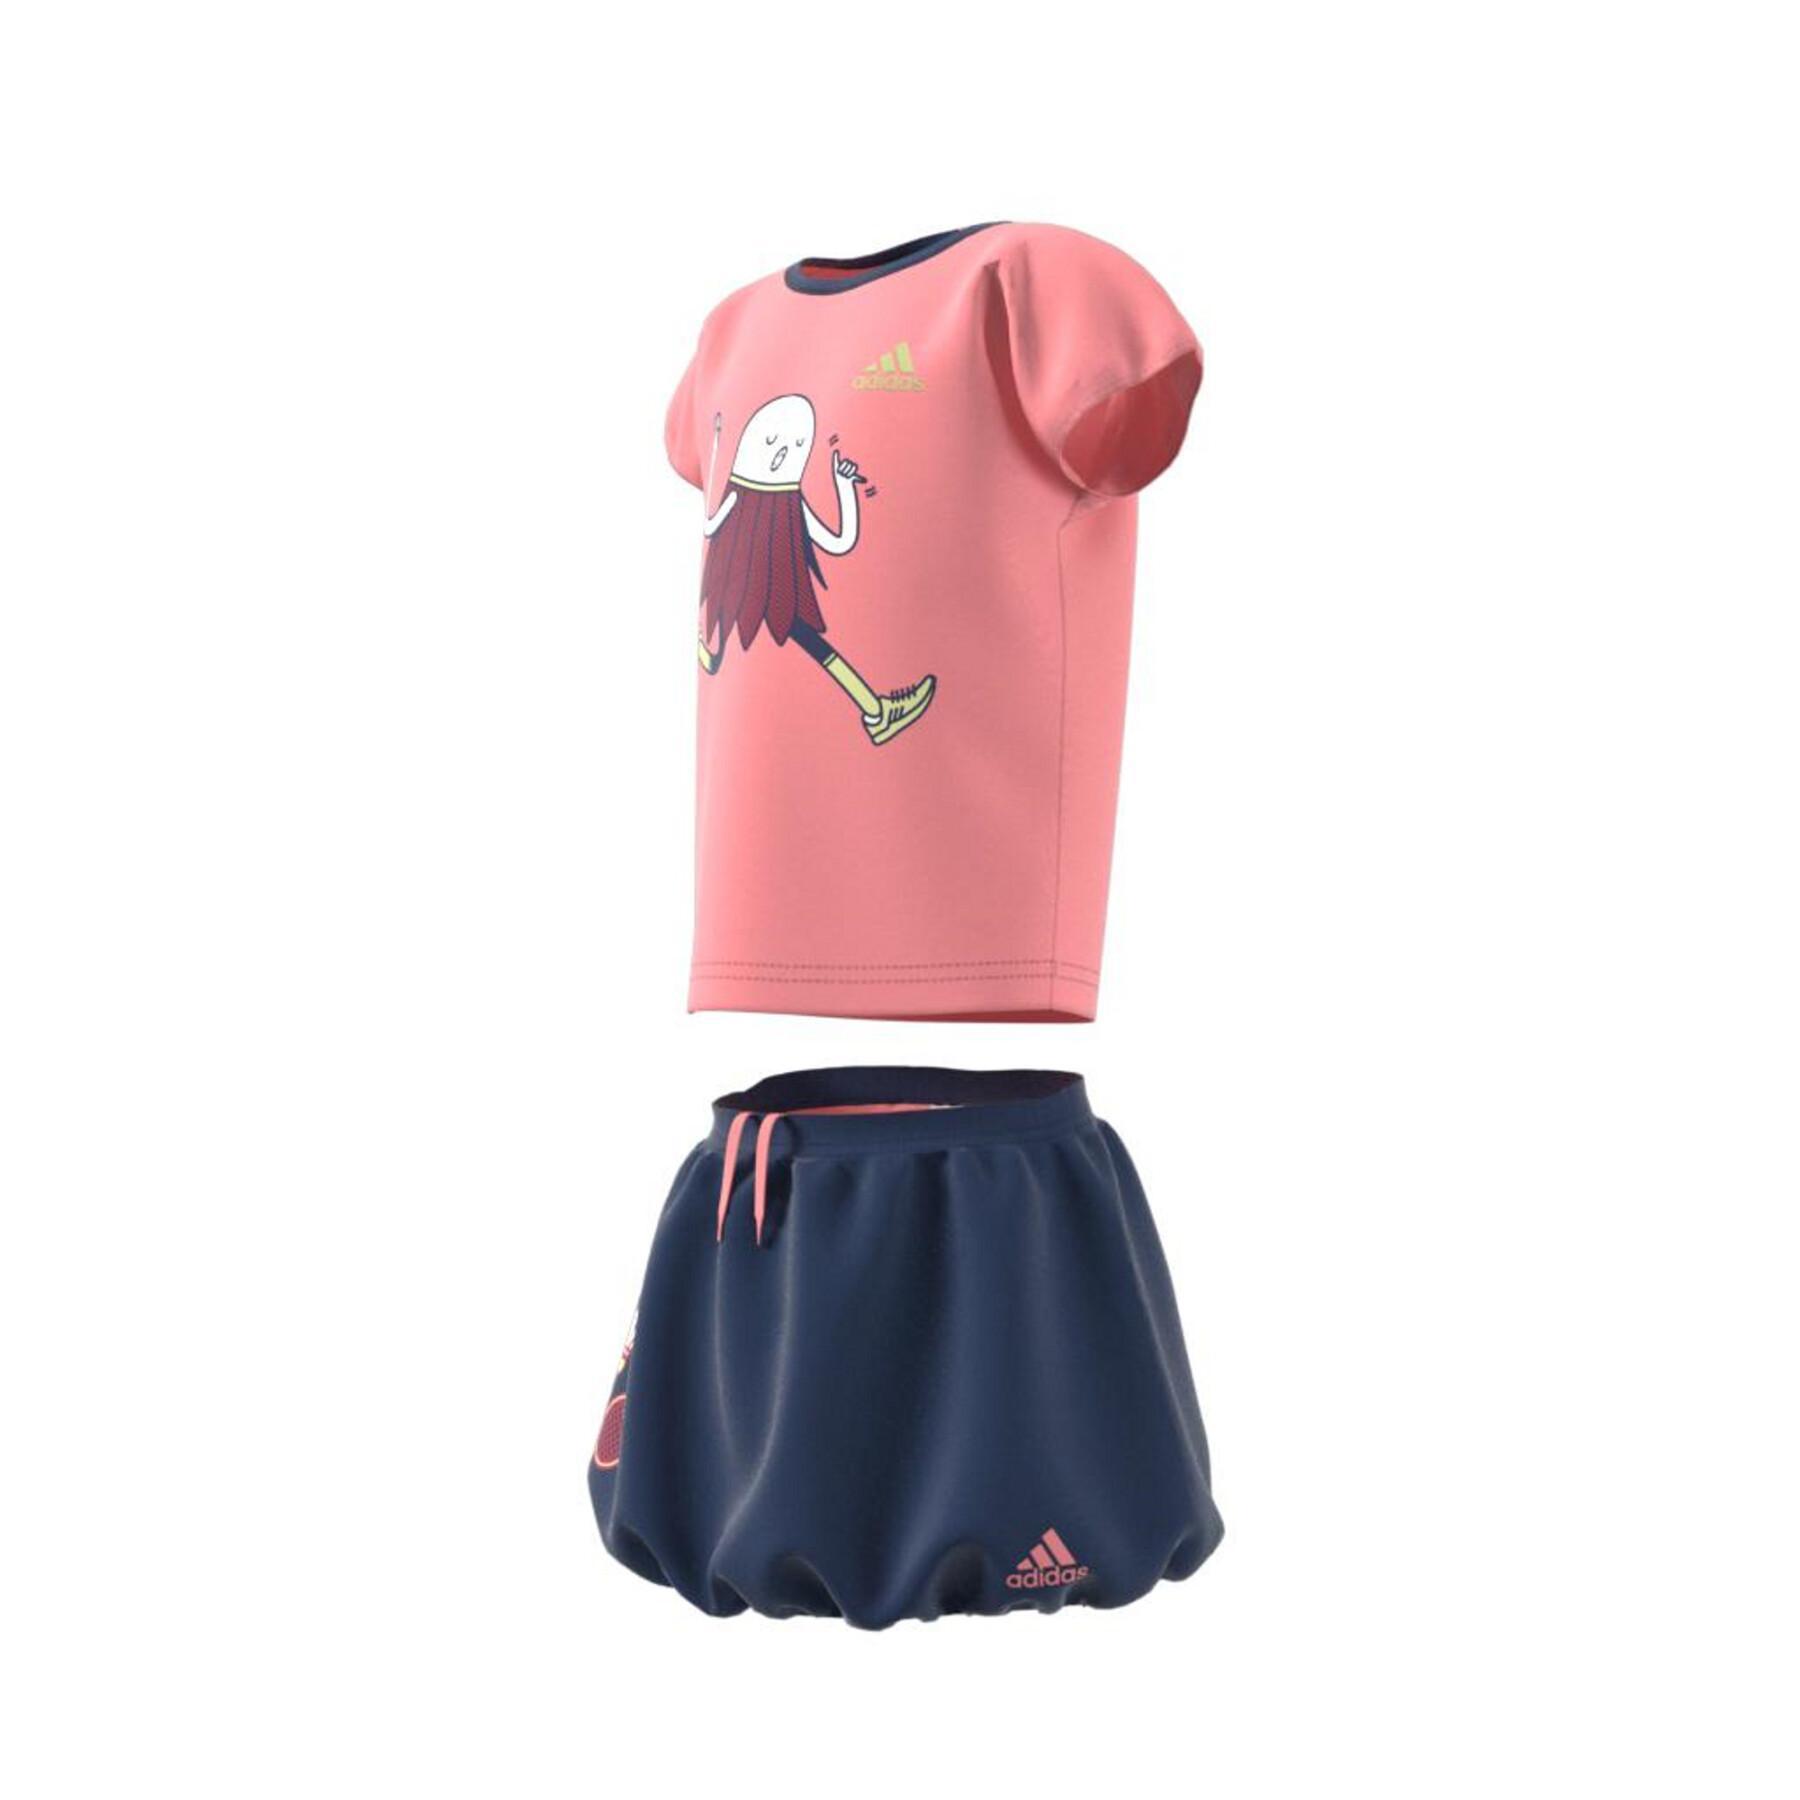 Baby-completo per bambine adidas Character Set